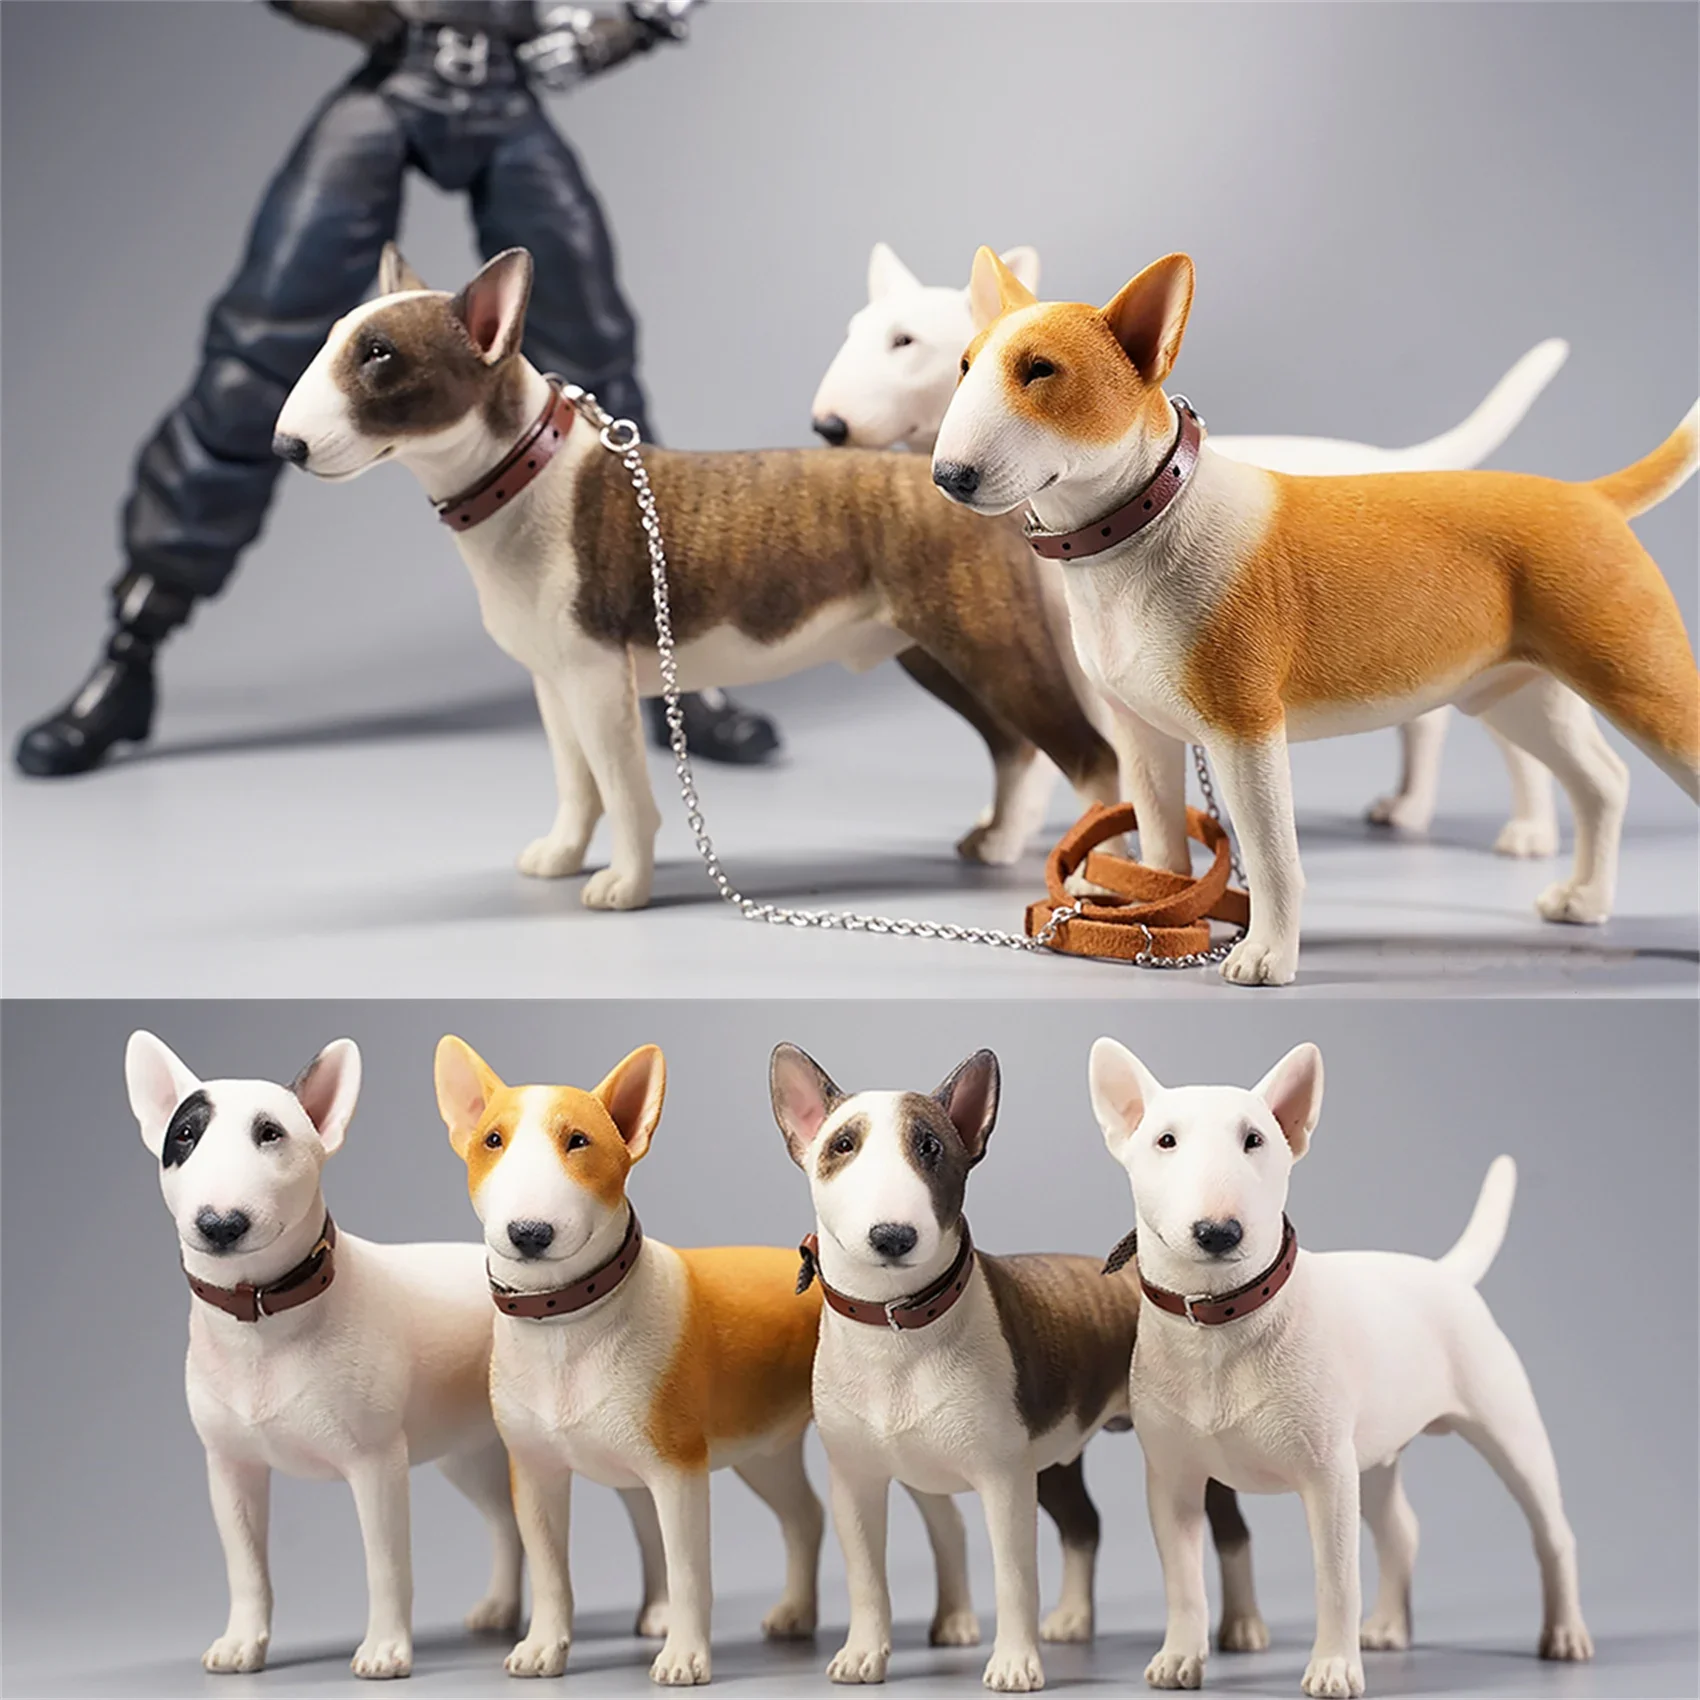 

JXK 1:6 Scale Bull Terrier Figure Dog Pet Healing Cute Canidae Animal Collector Toy Resin Desktop Decoration Gift